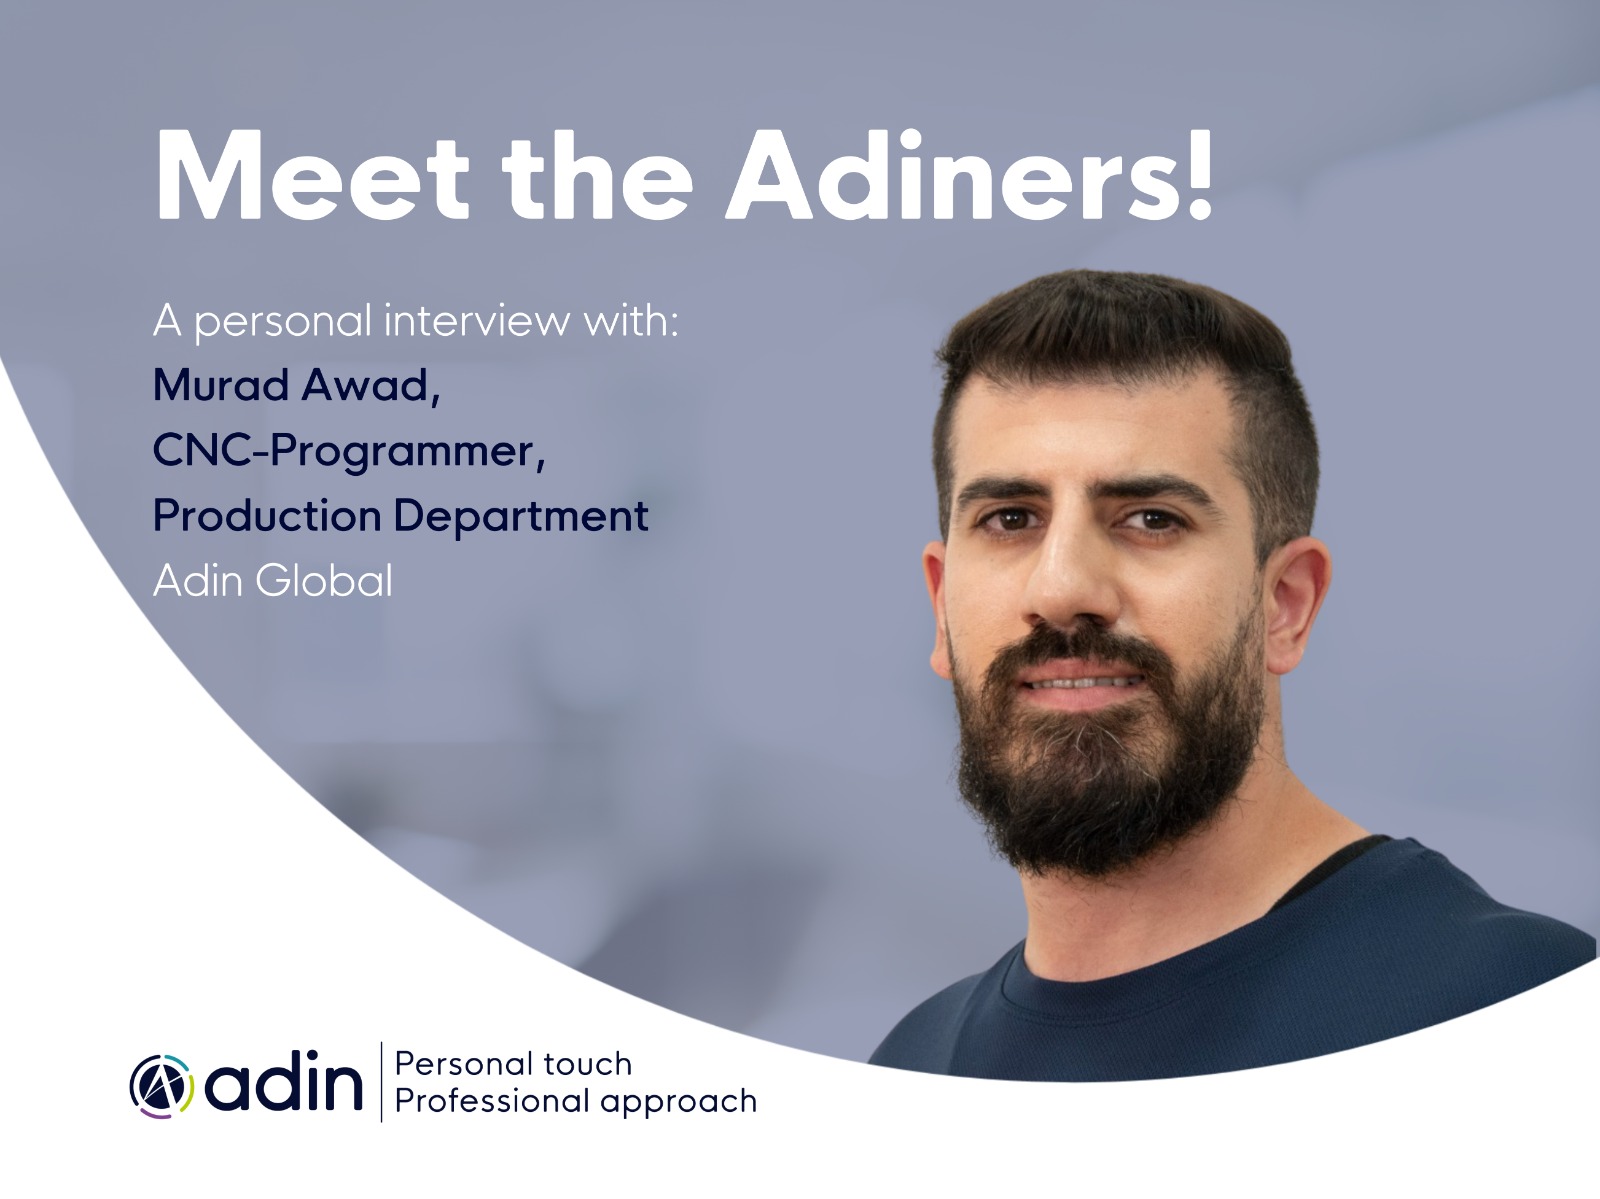 Meet the Adiners:An interview with Murad Awad, CNC-Programmer, Production Department